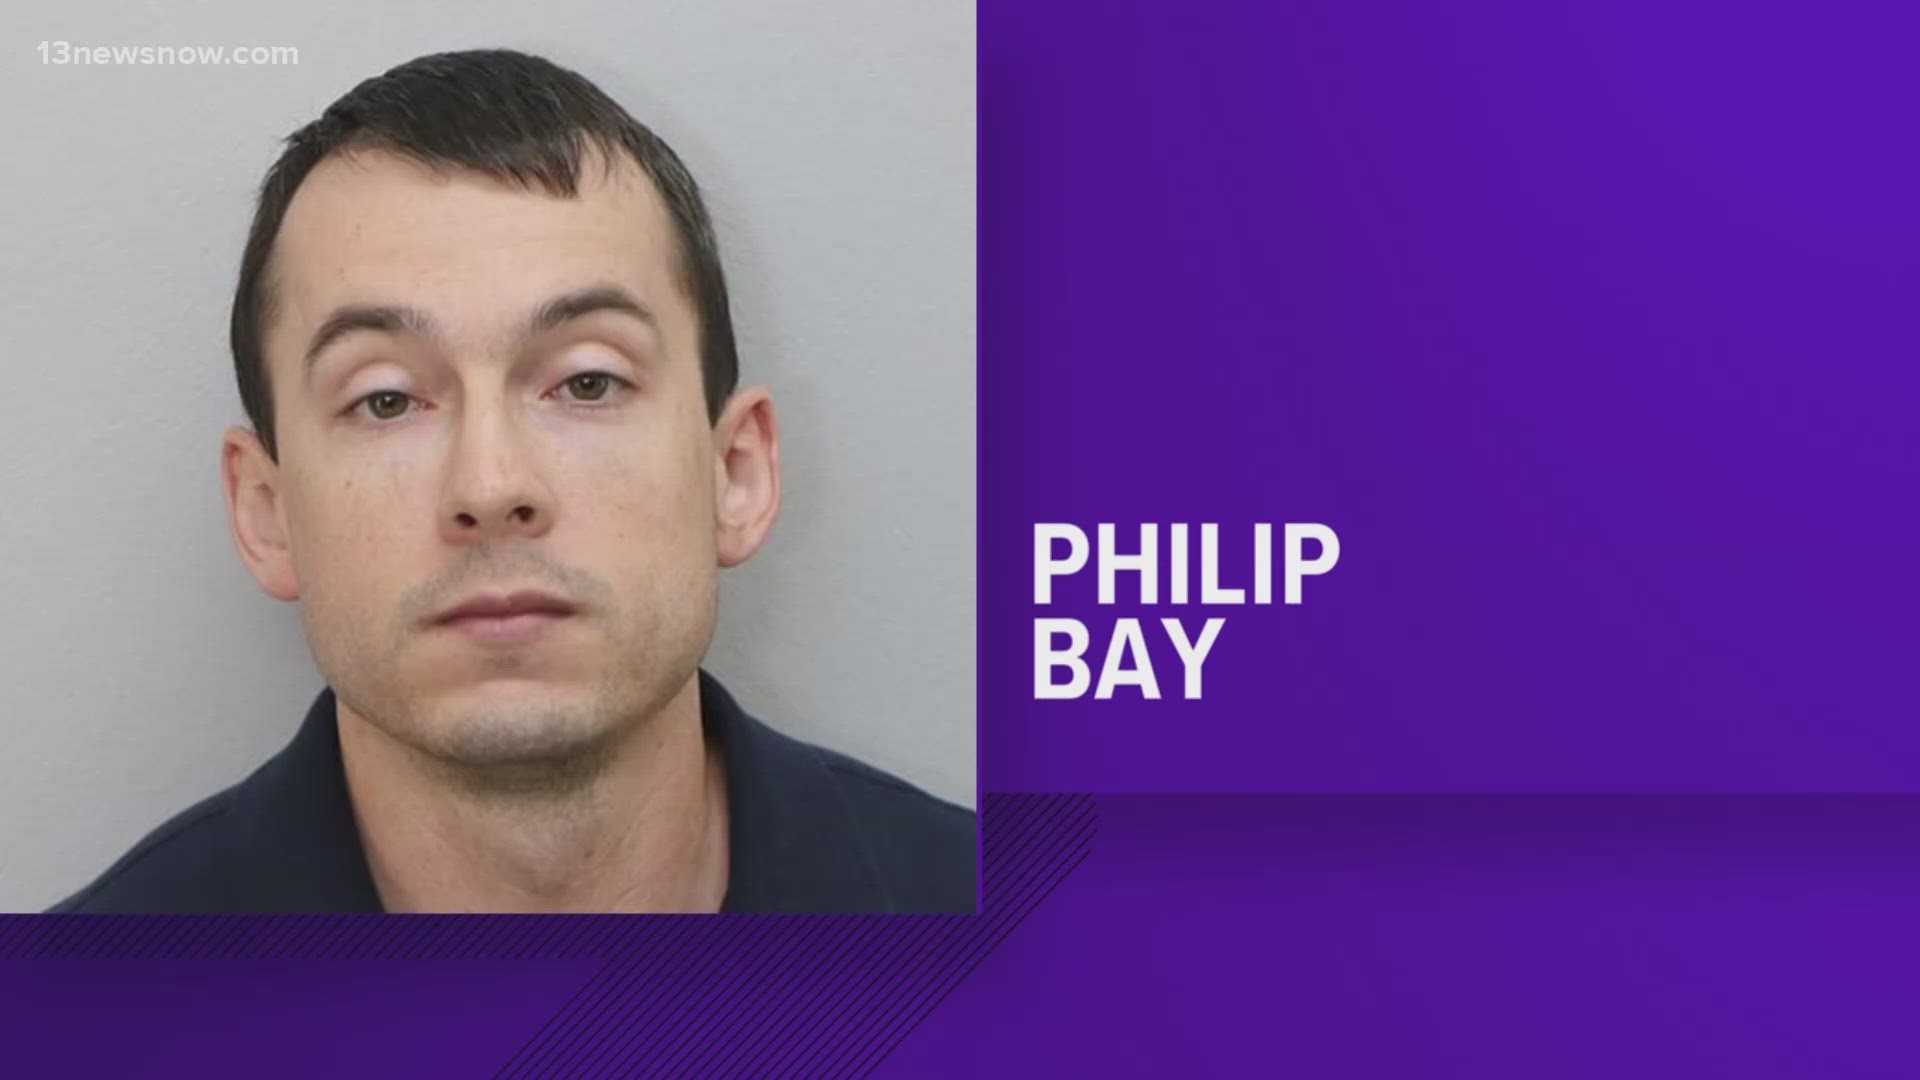 Man convicted in VB school bomb threat arrested for child porn |  13newsnow.com